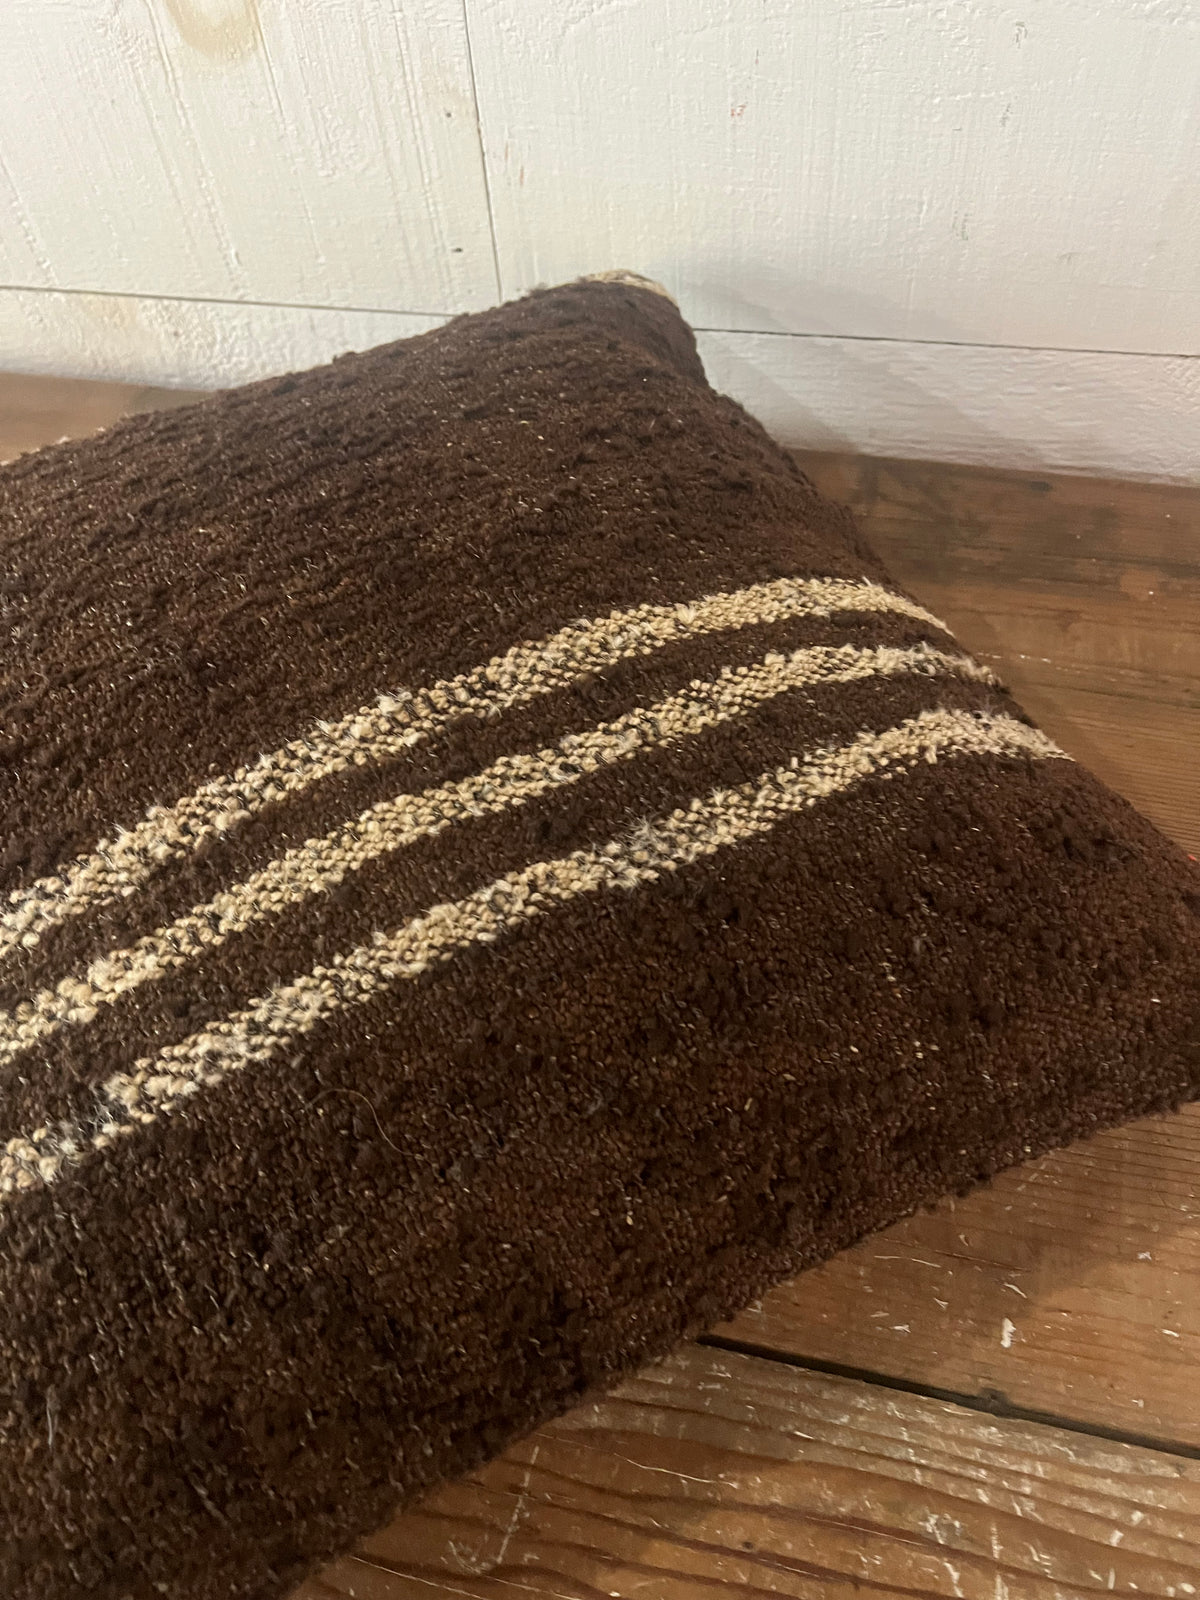 Vintage Rug Pillow Cover - 20 x 20